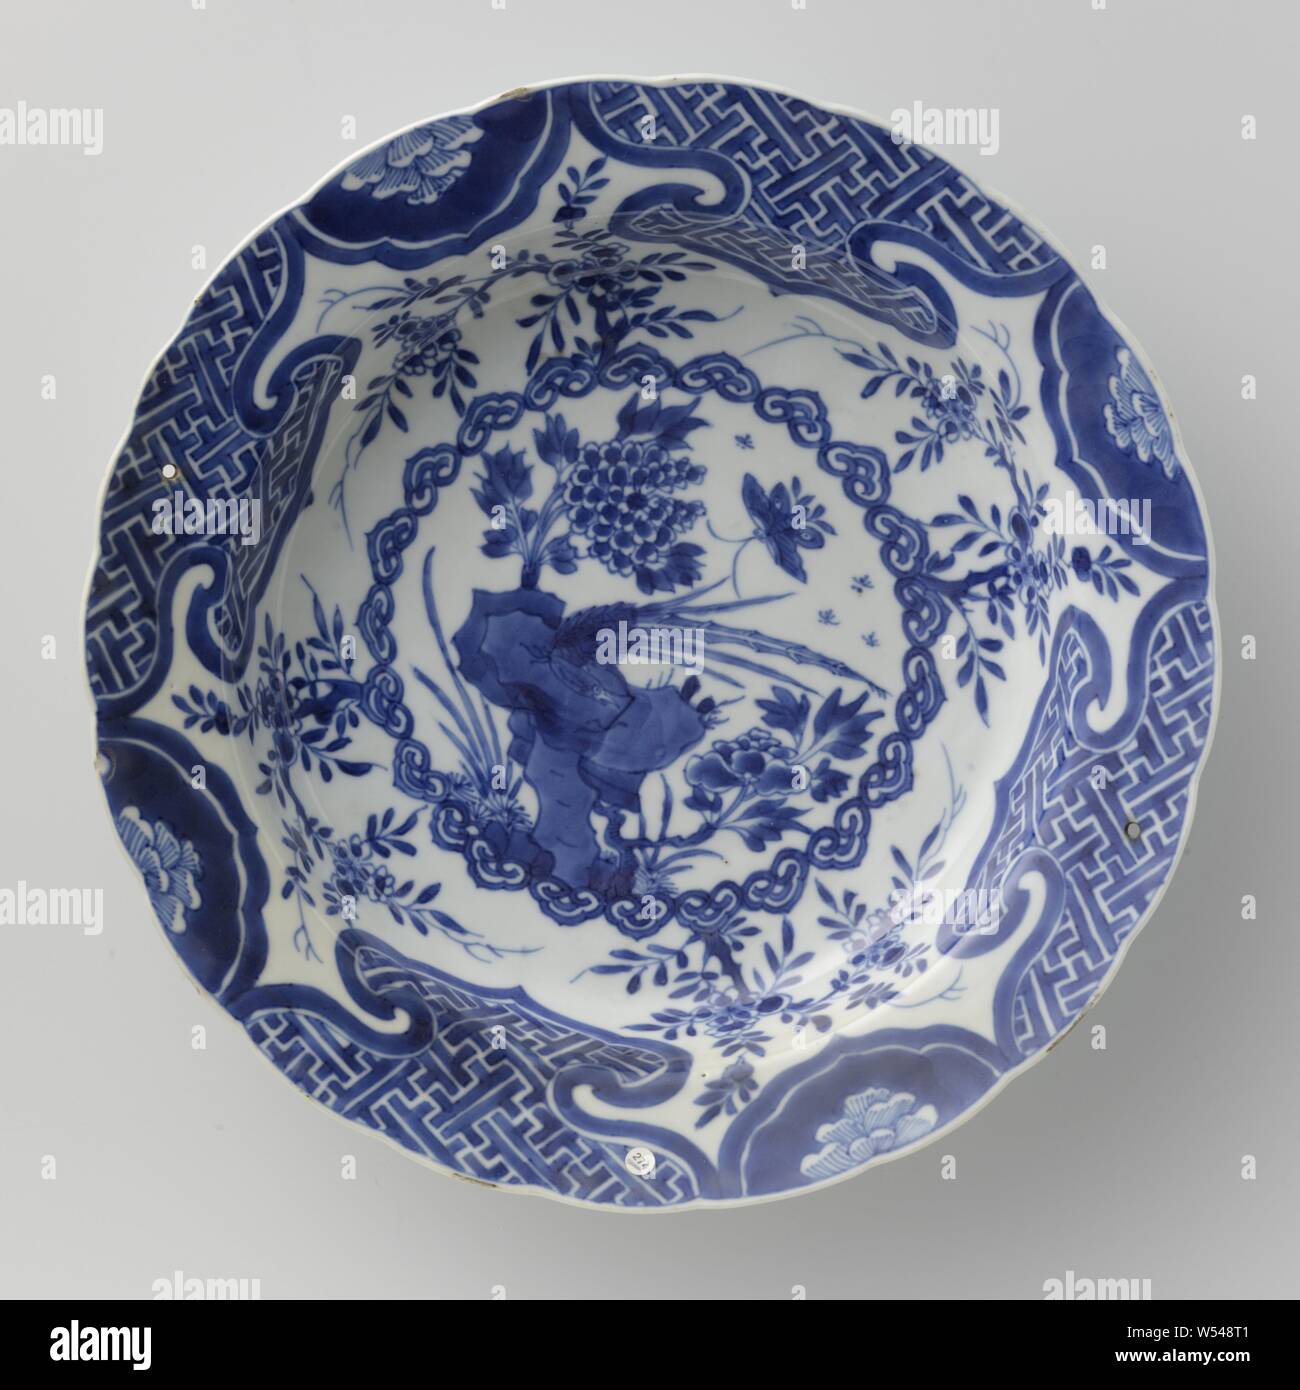 Dish with a pheasant on a rock, butterfly and flower sprays, Deep porcelain dish with lobed edge, painted in underglaze blue. On the shelf a medallion of ruyi motifs containing a pheasant on a rock with two flowering plants, butterfly and insects, a flower branch four times around the medallion, the border with alternating a lobed cartouche with a flower in reserve and a larger cartouche with a geometric pattern, the back with three flower sprays. Two drill holes and a chip in the edge. Blue and white., Battle, fighting in general (naval force), warfare, military affairs (sailing ships Stock Photo